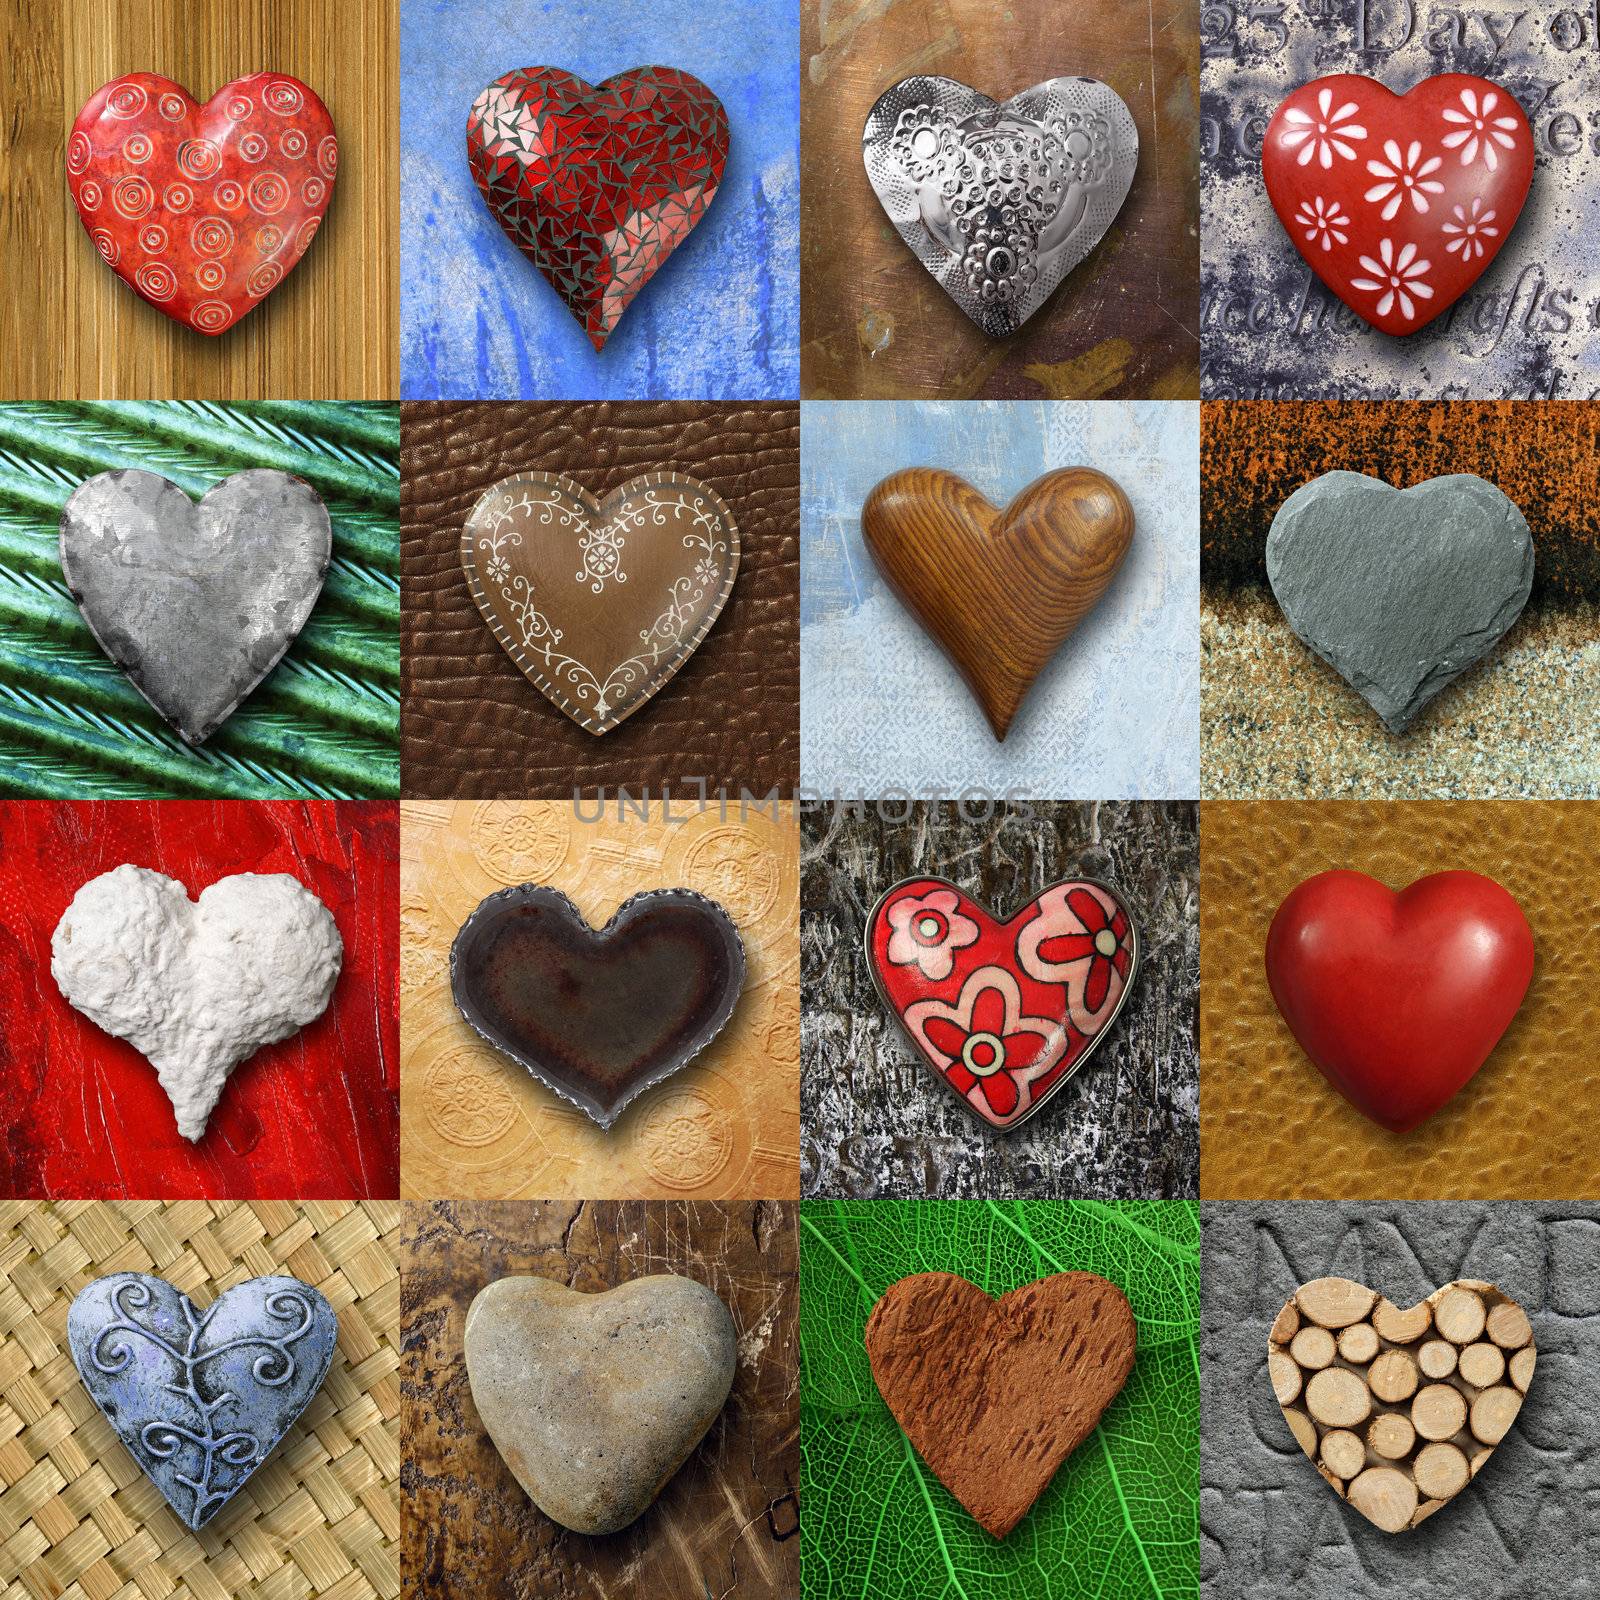 Photos of heart-shaped things made of stone, metal and wood on different backgrounds.